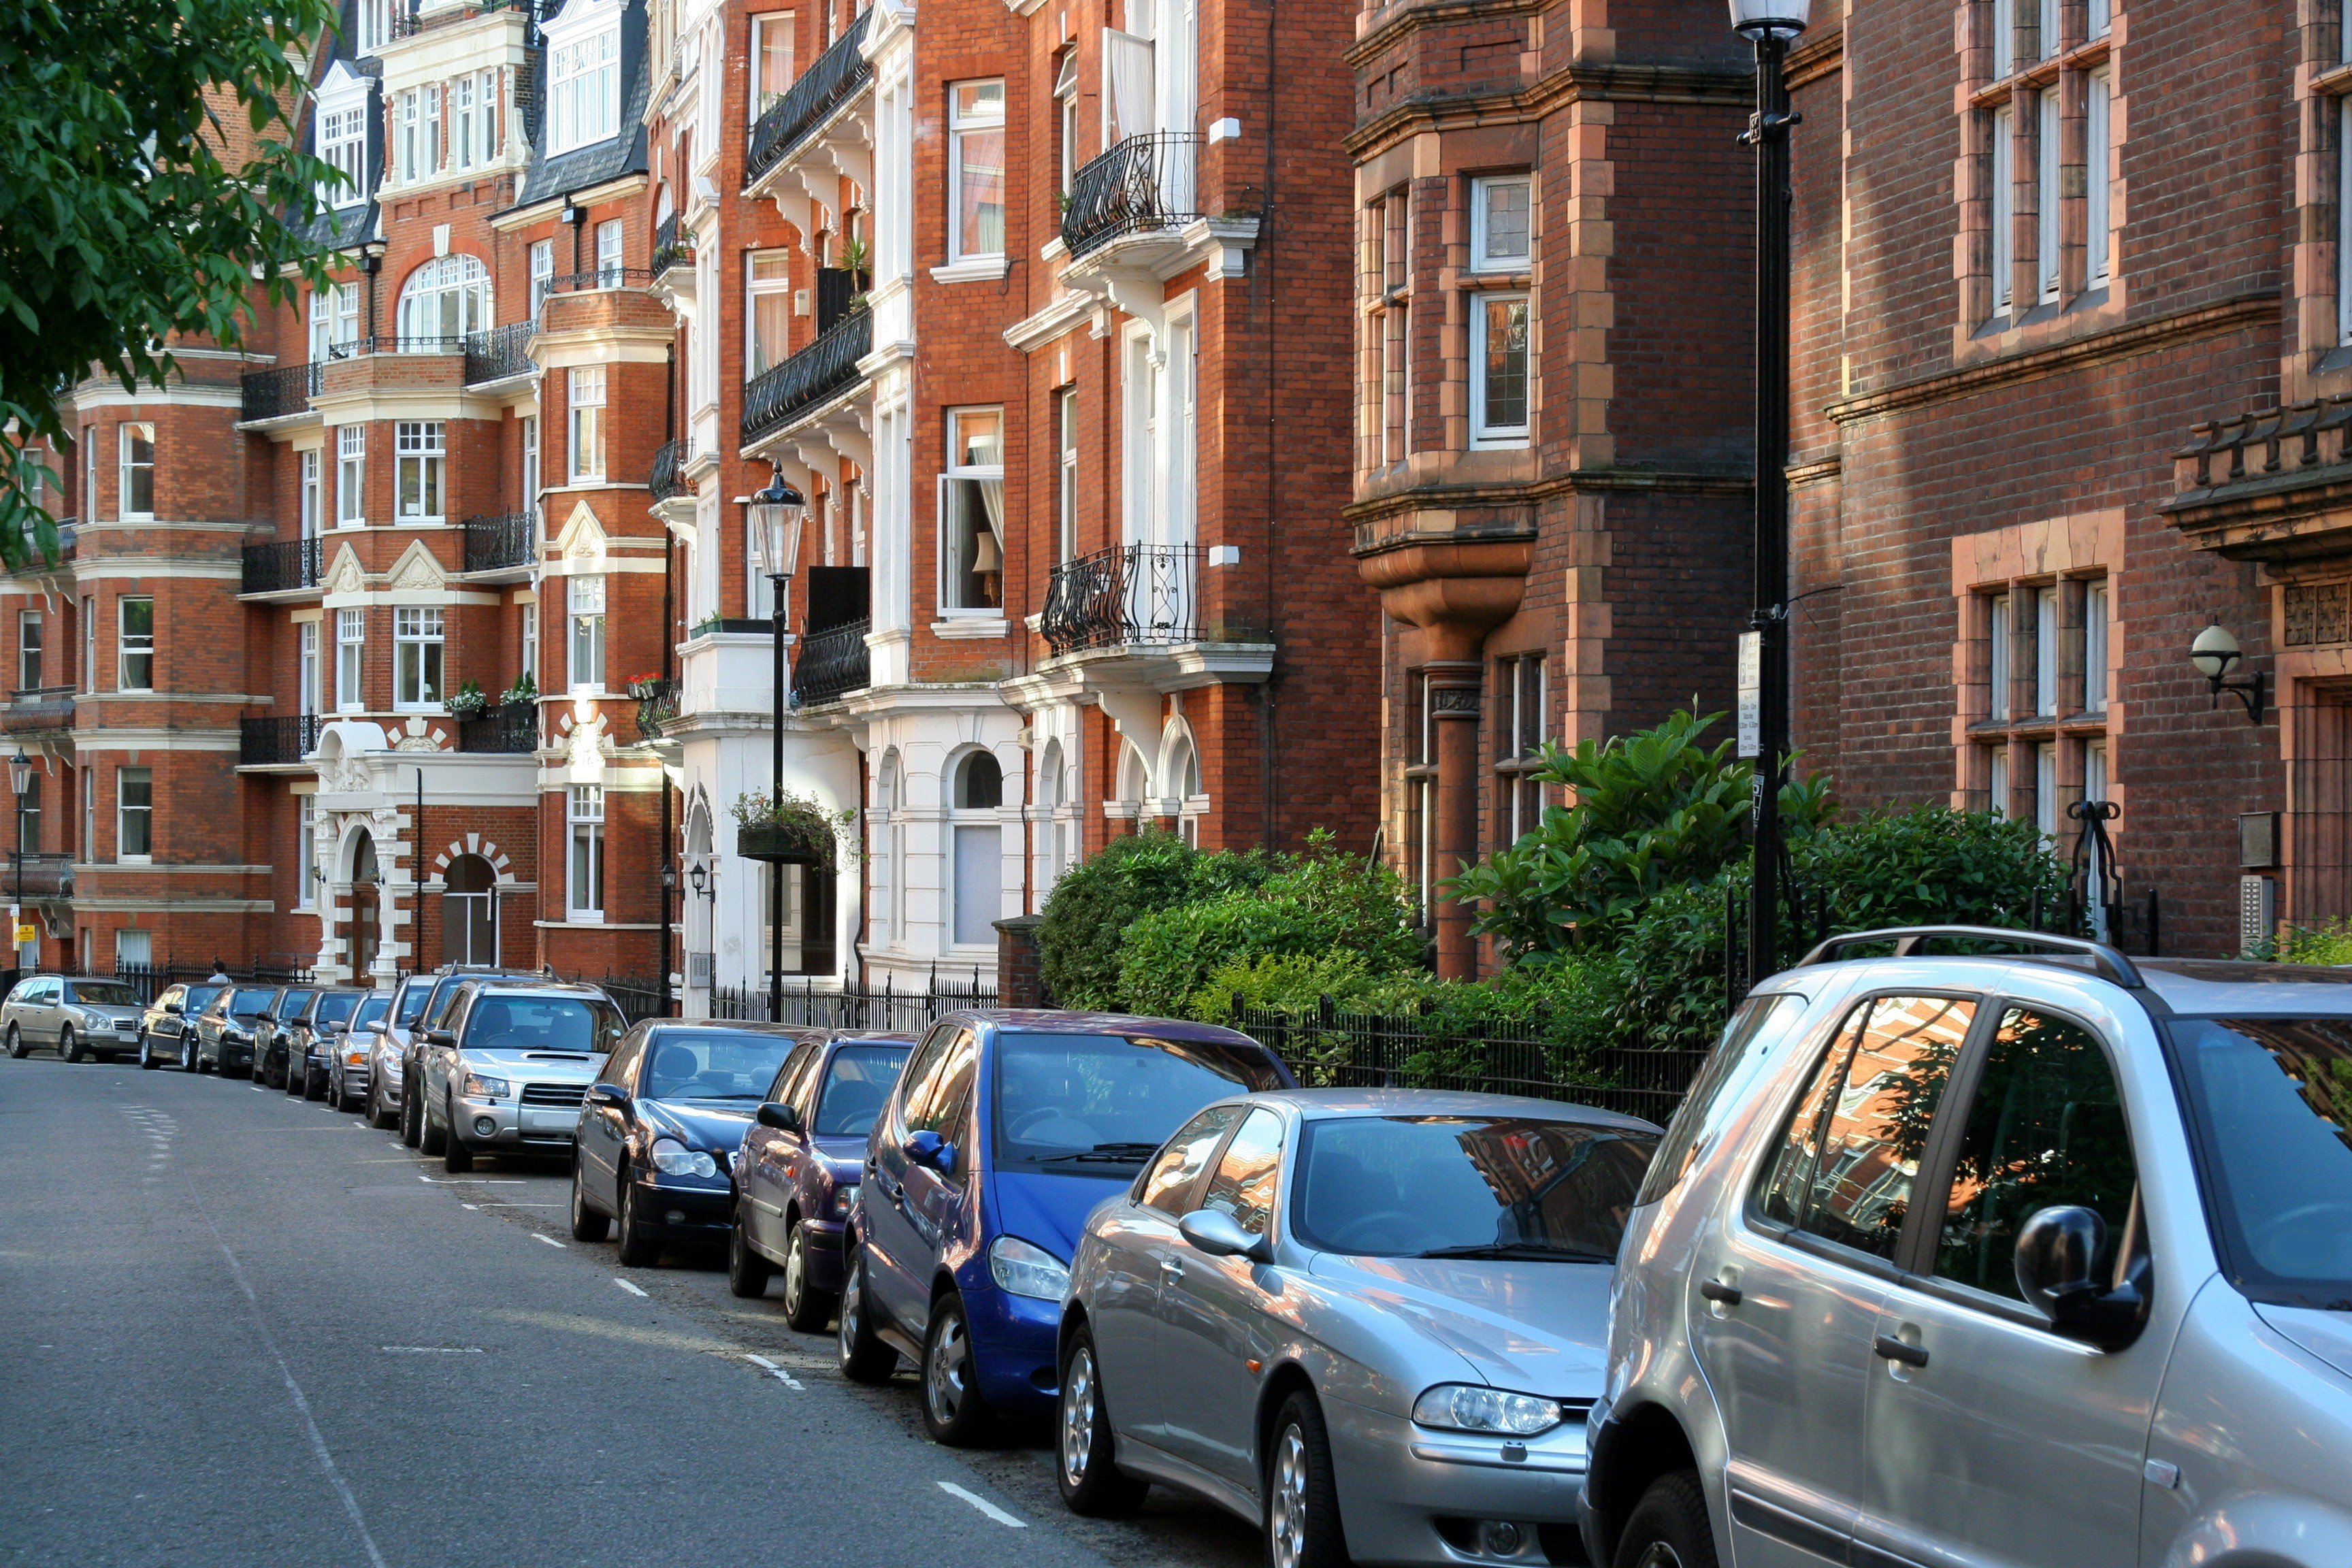 In some parts of London by 2030 prices will increase by 100%